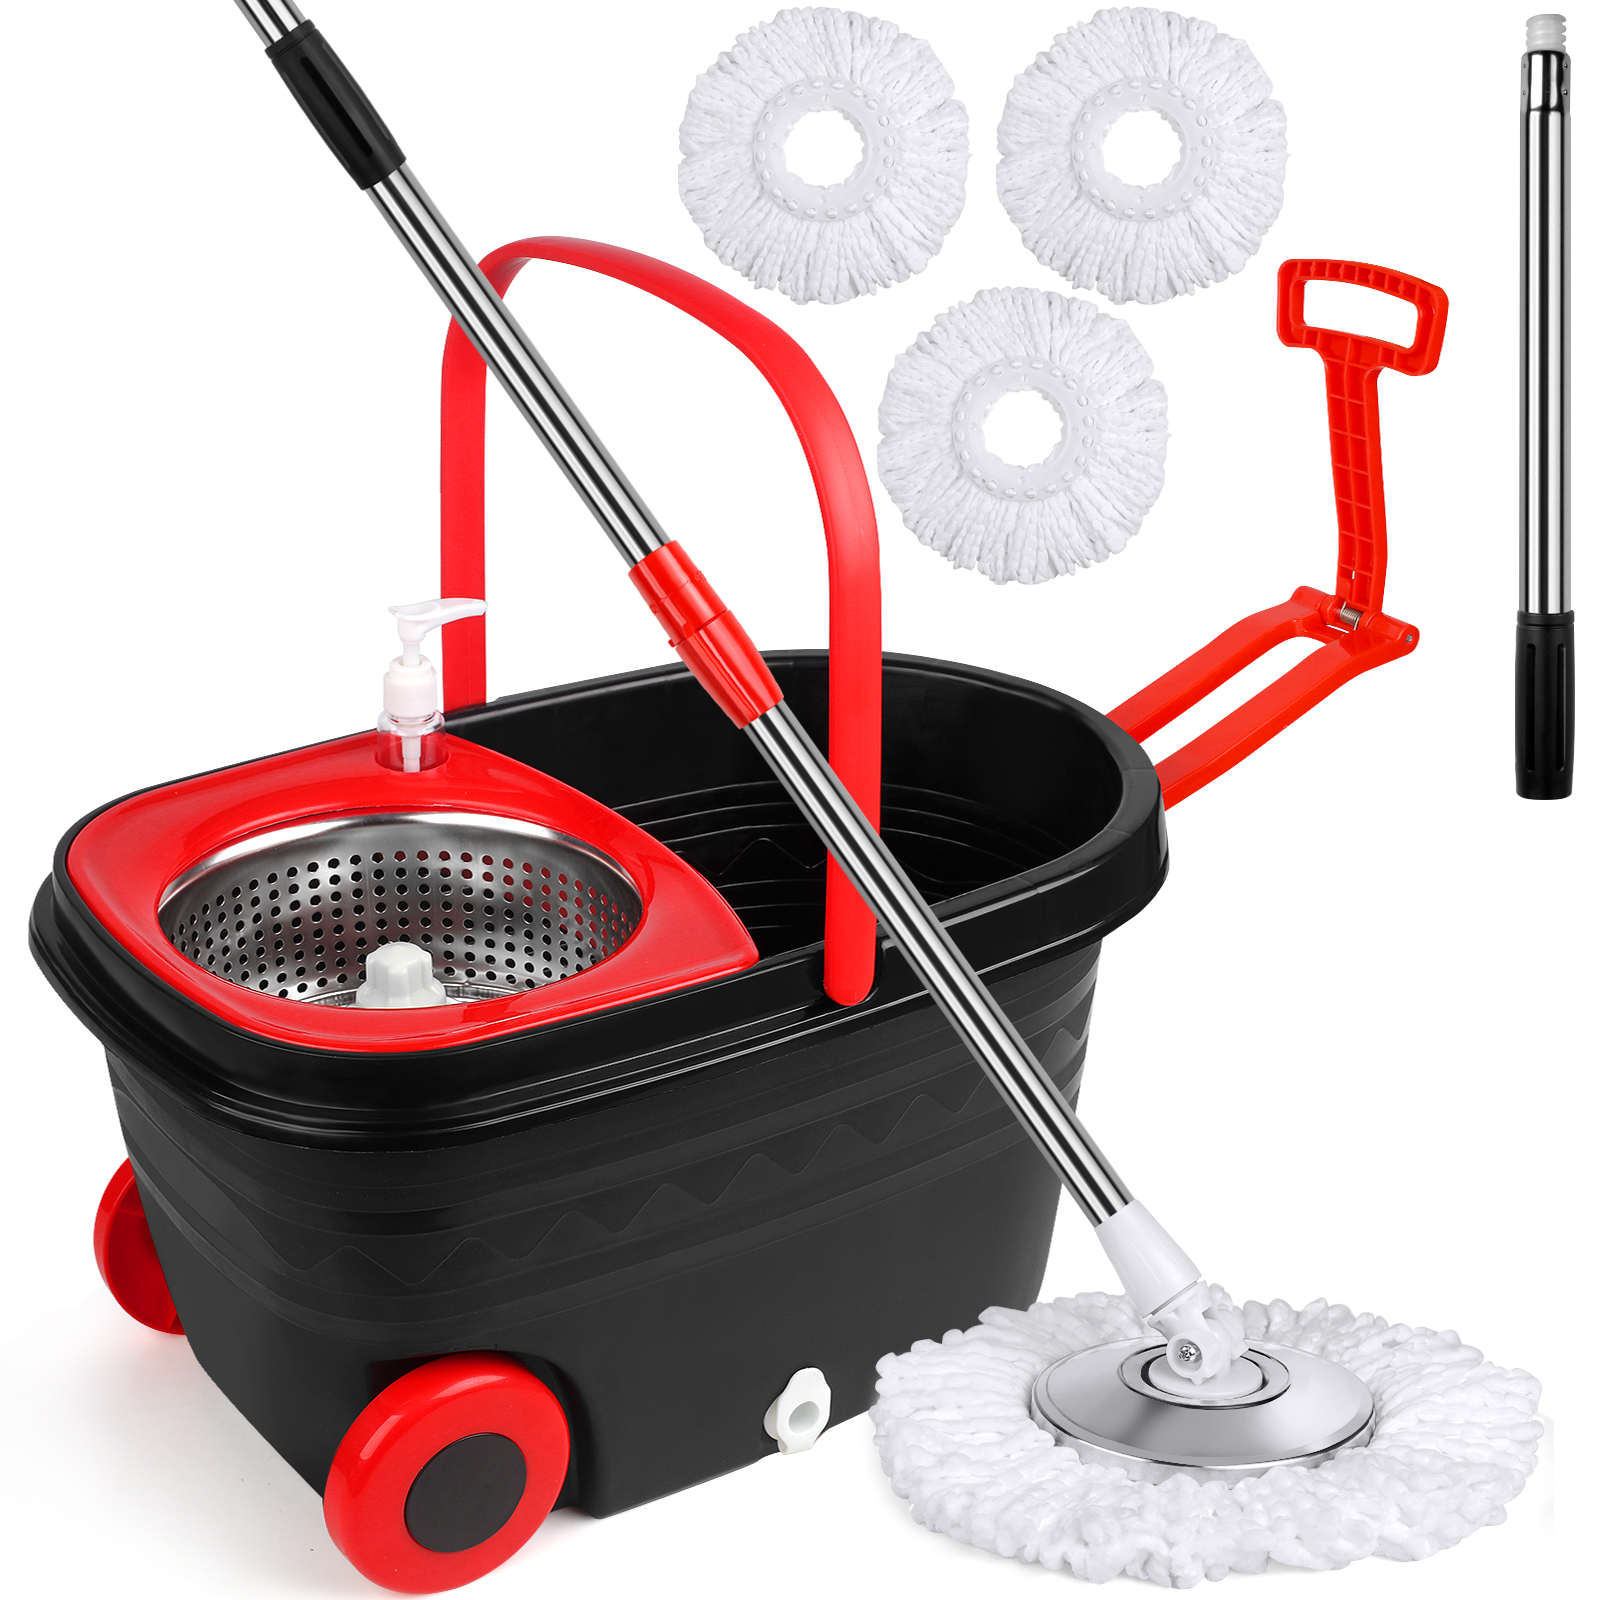 

Microfiber Spin Mop, Bucket Floor Cleaning System With 3 Extra Refills, Black